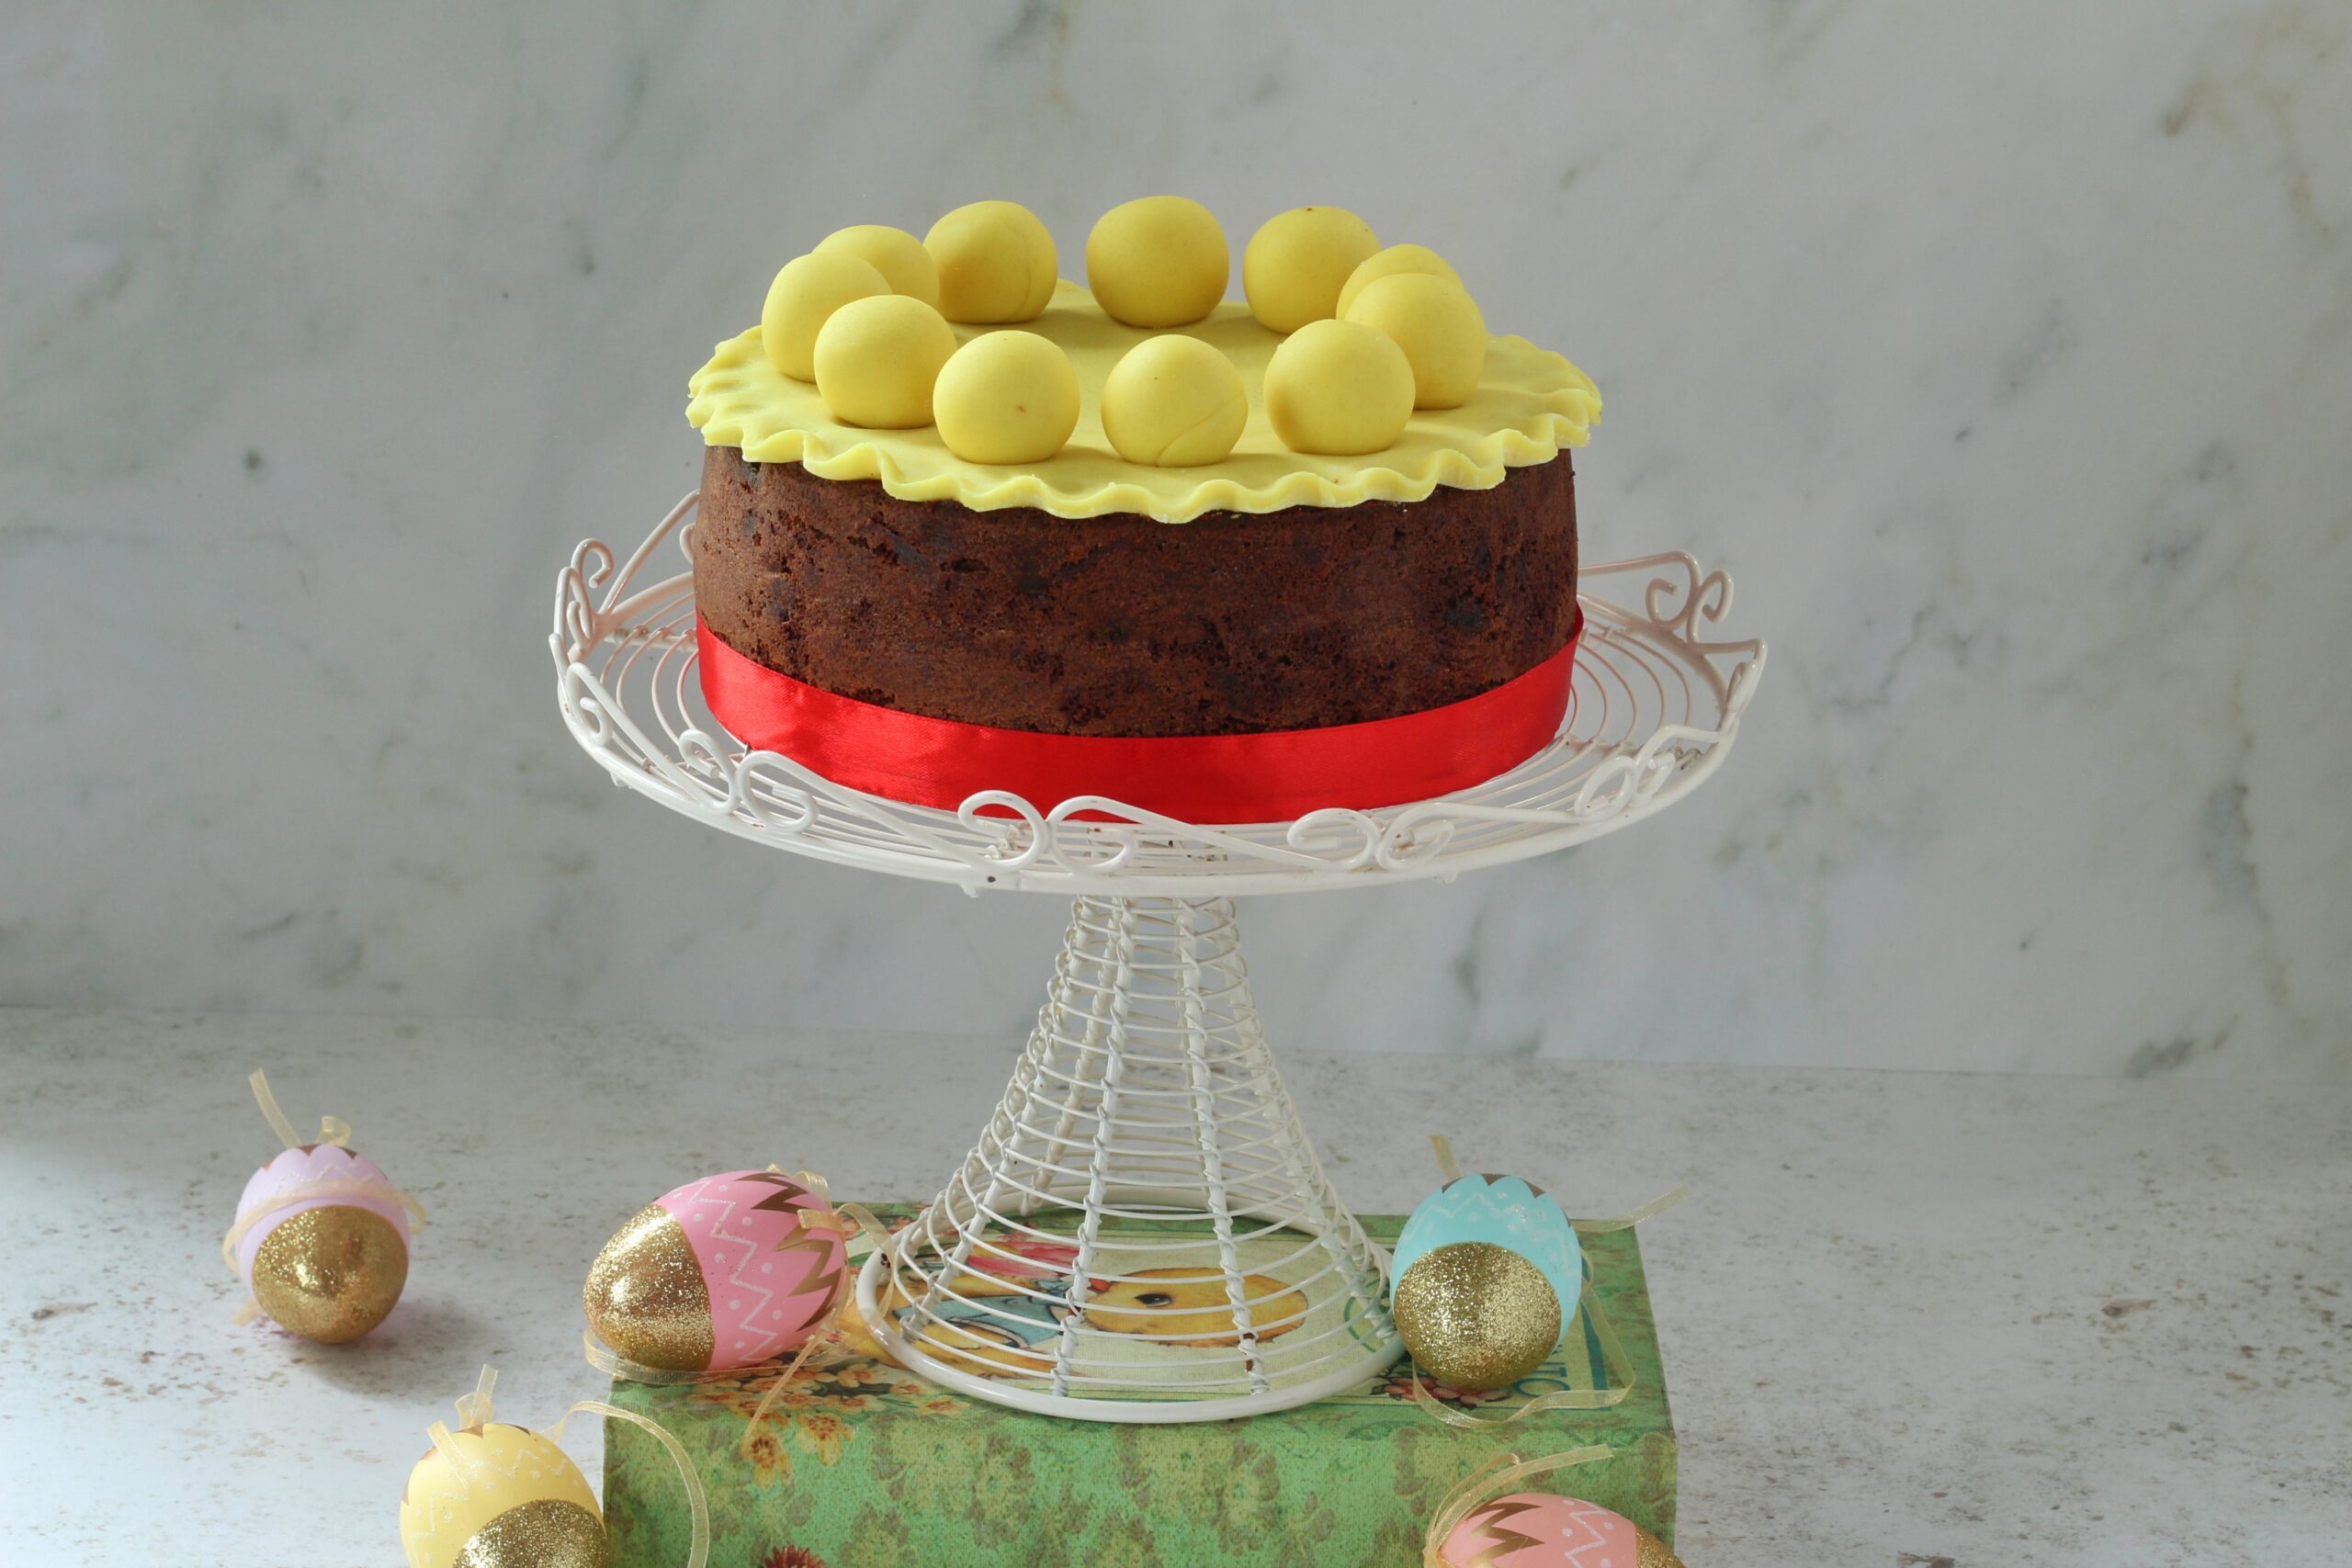 Dairy-free, egg-free and gluten-free Simnel cake | Food | The Guardian